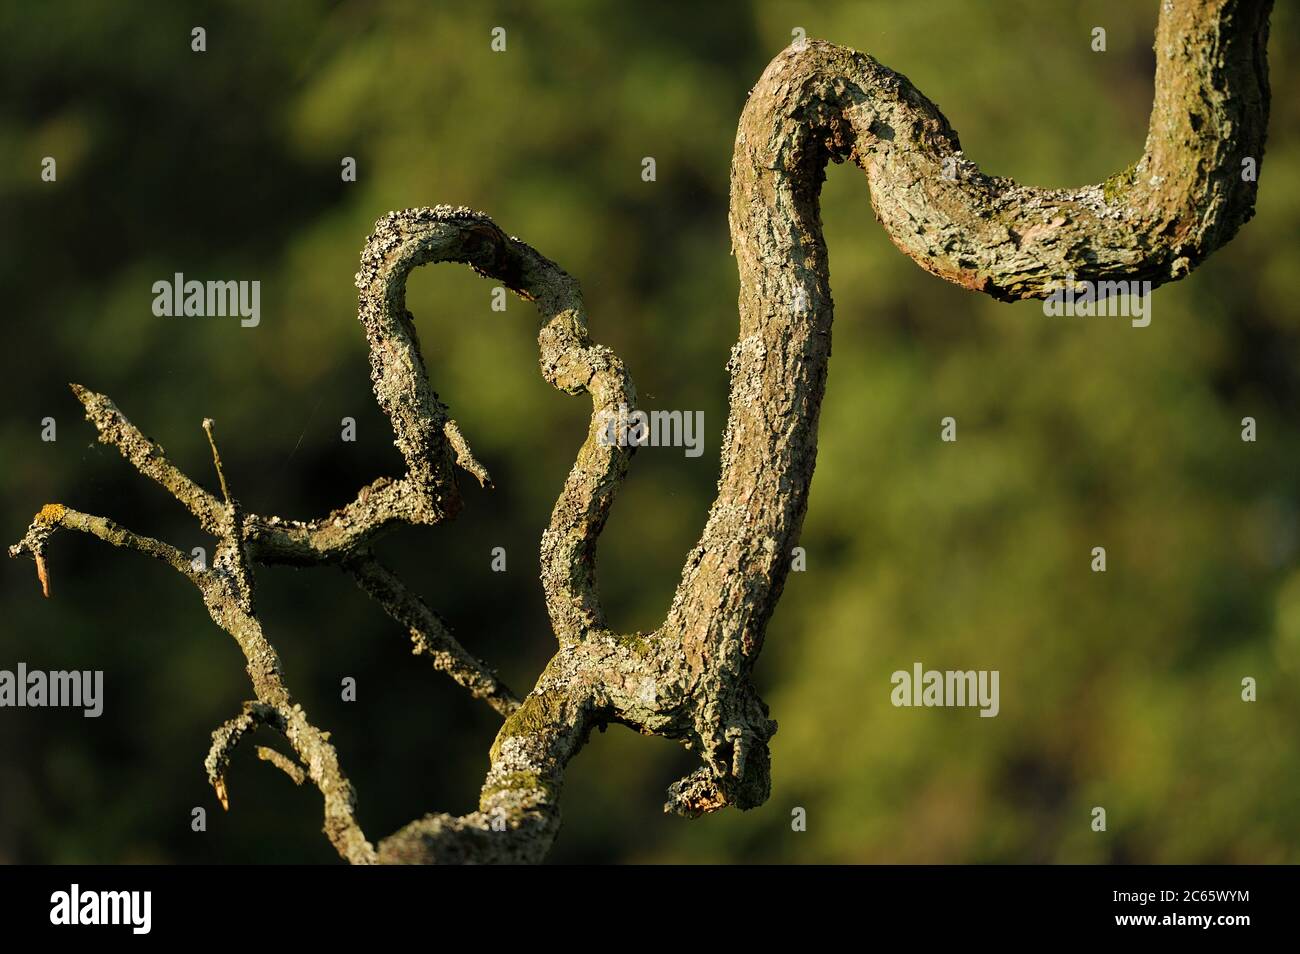 Branch of an Sessile oak (Quercus petraea) in the National Park Saxon Switzerland (Saechsische Schweiz), Europe, Central Europe, Germany Stock Photo